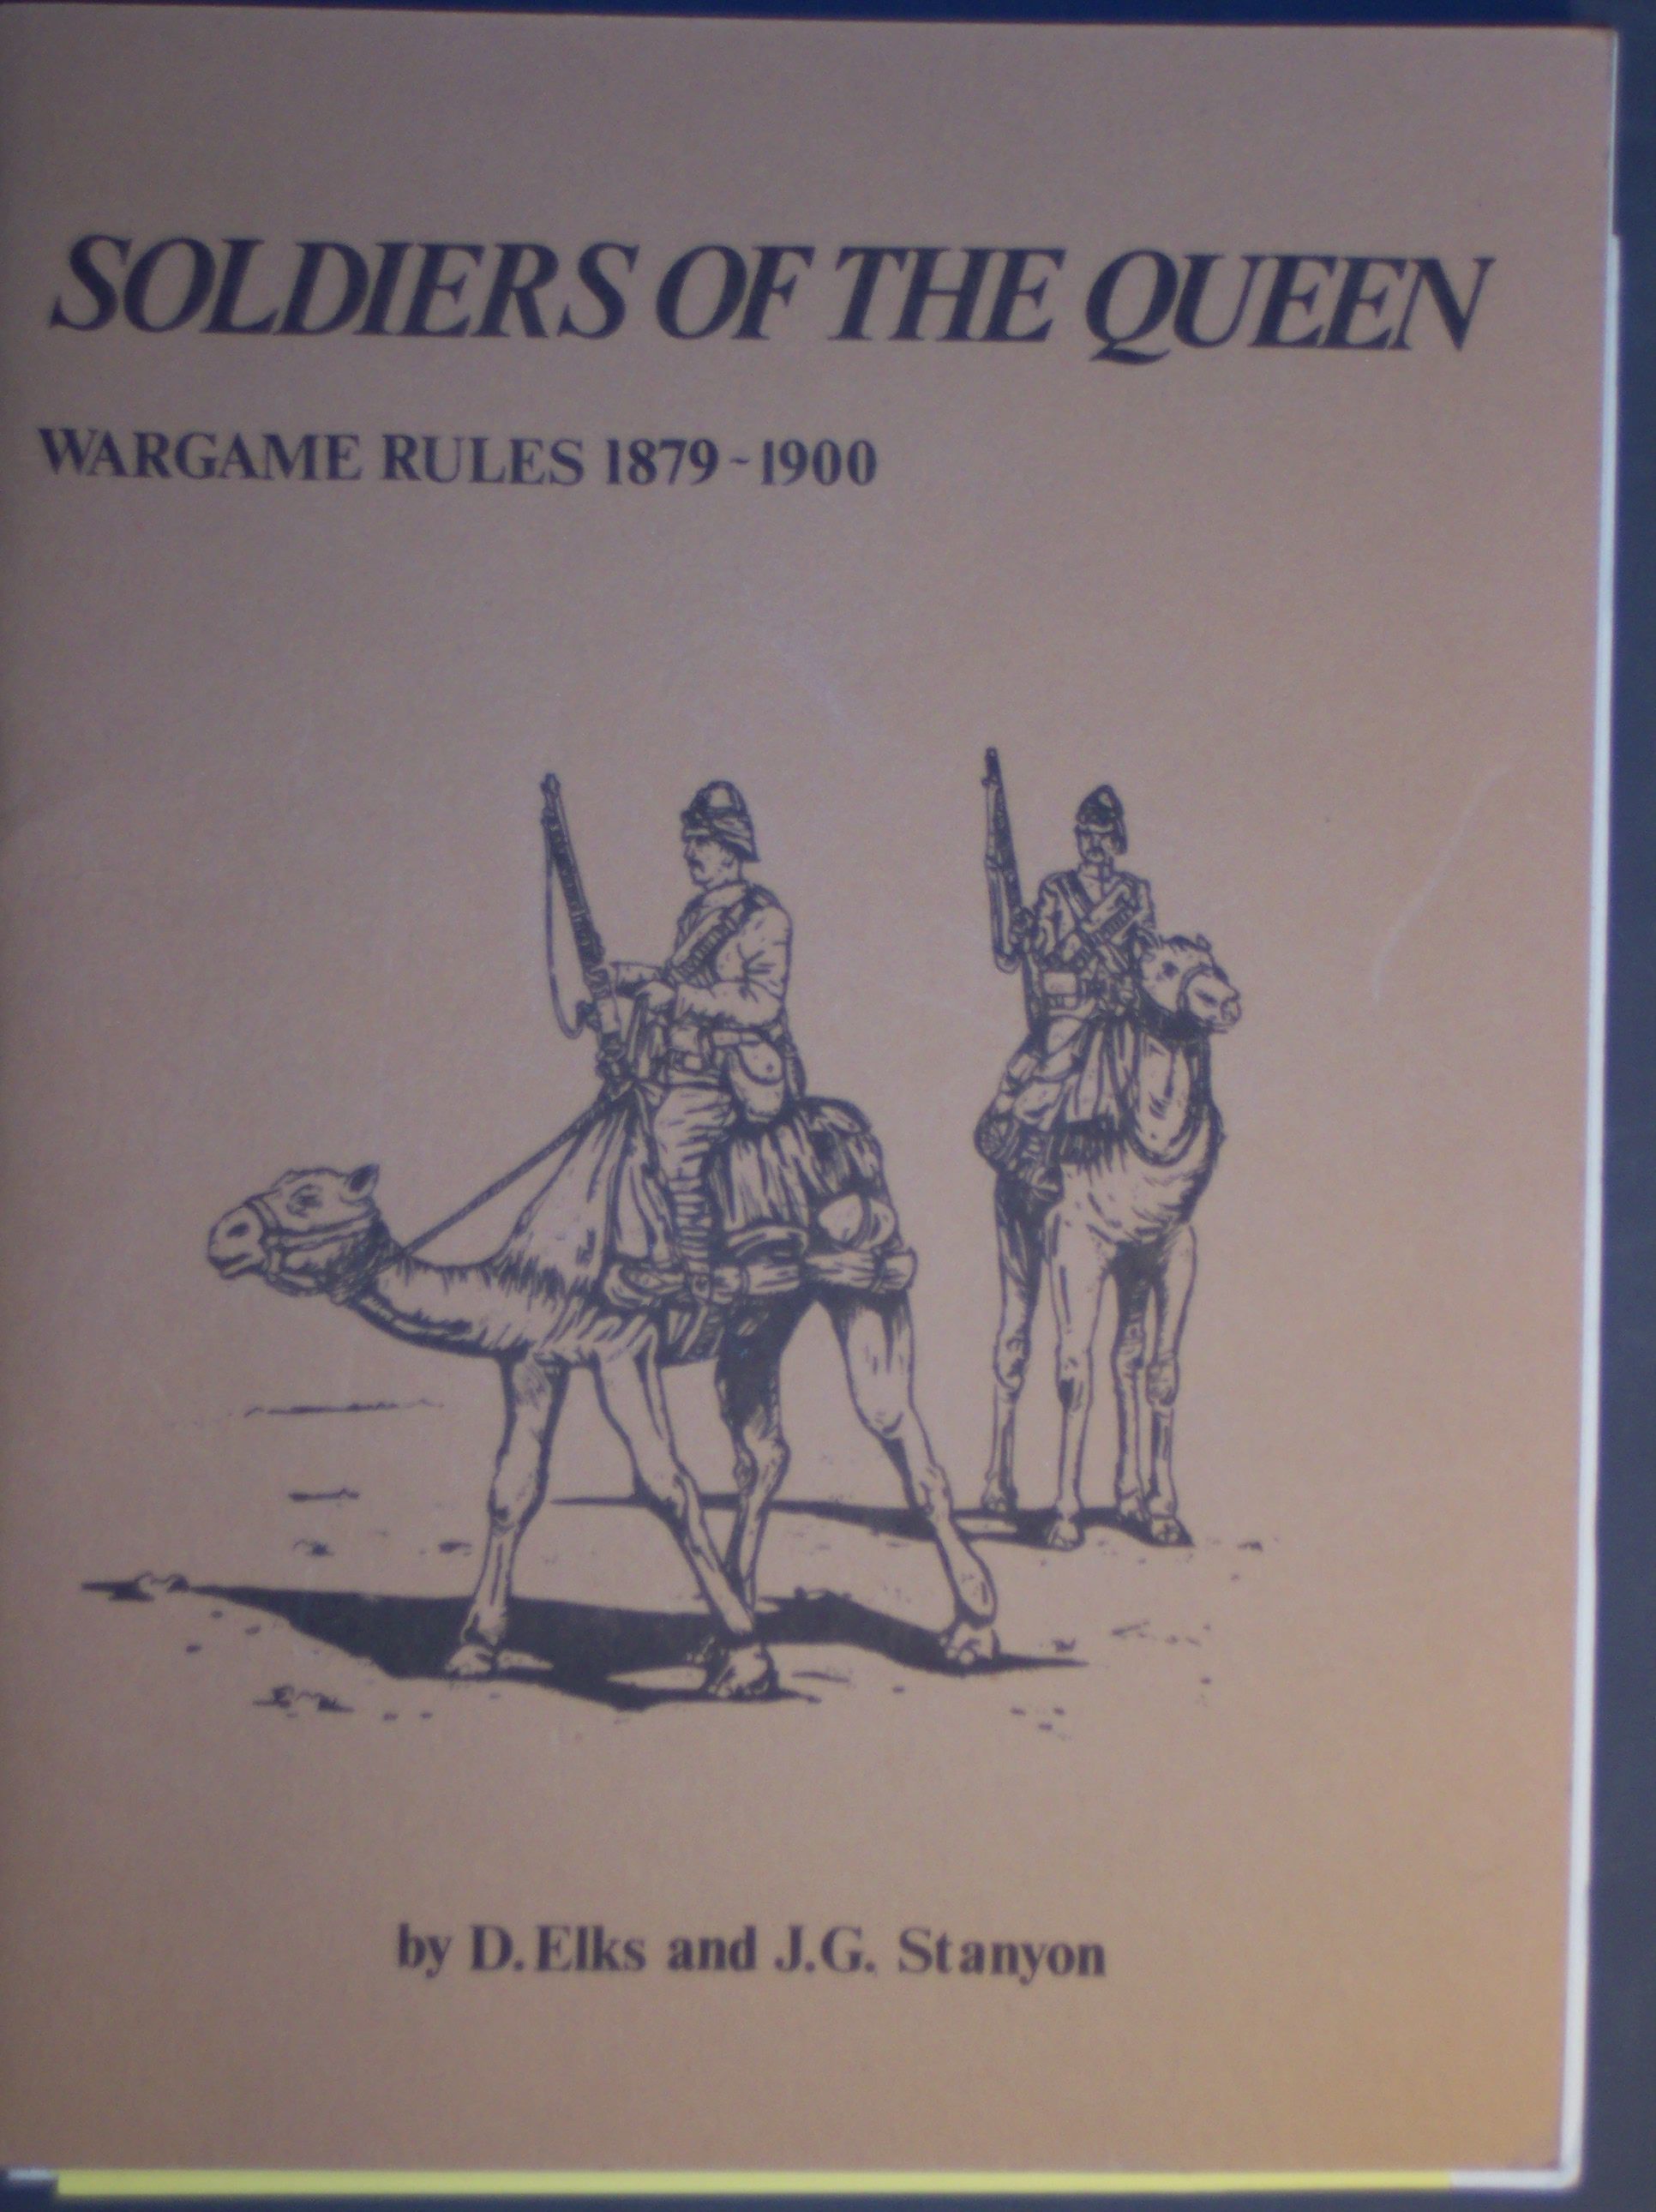 Soldiers of the Queen: Wargame Rules, 1879-1900